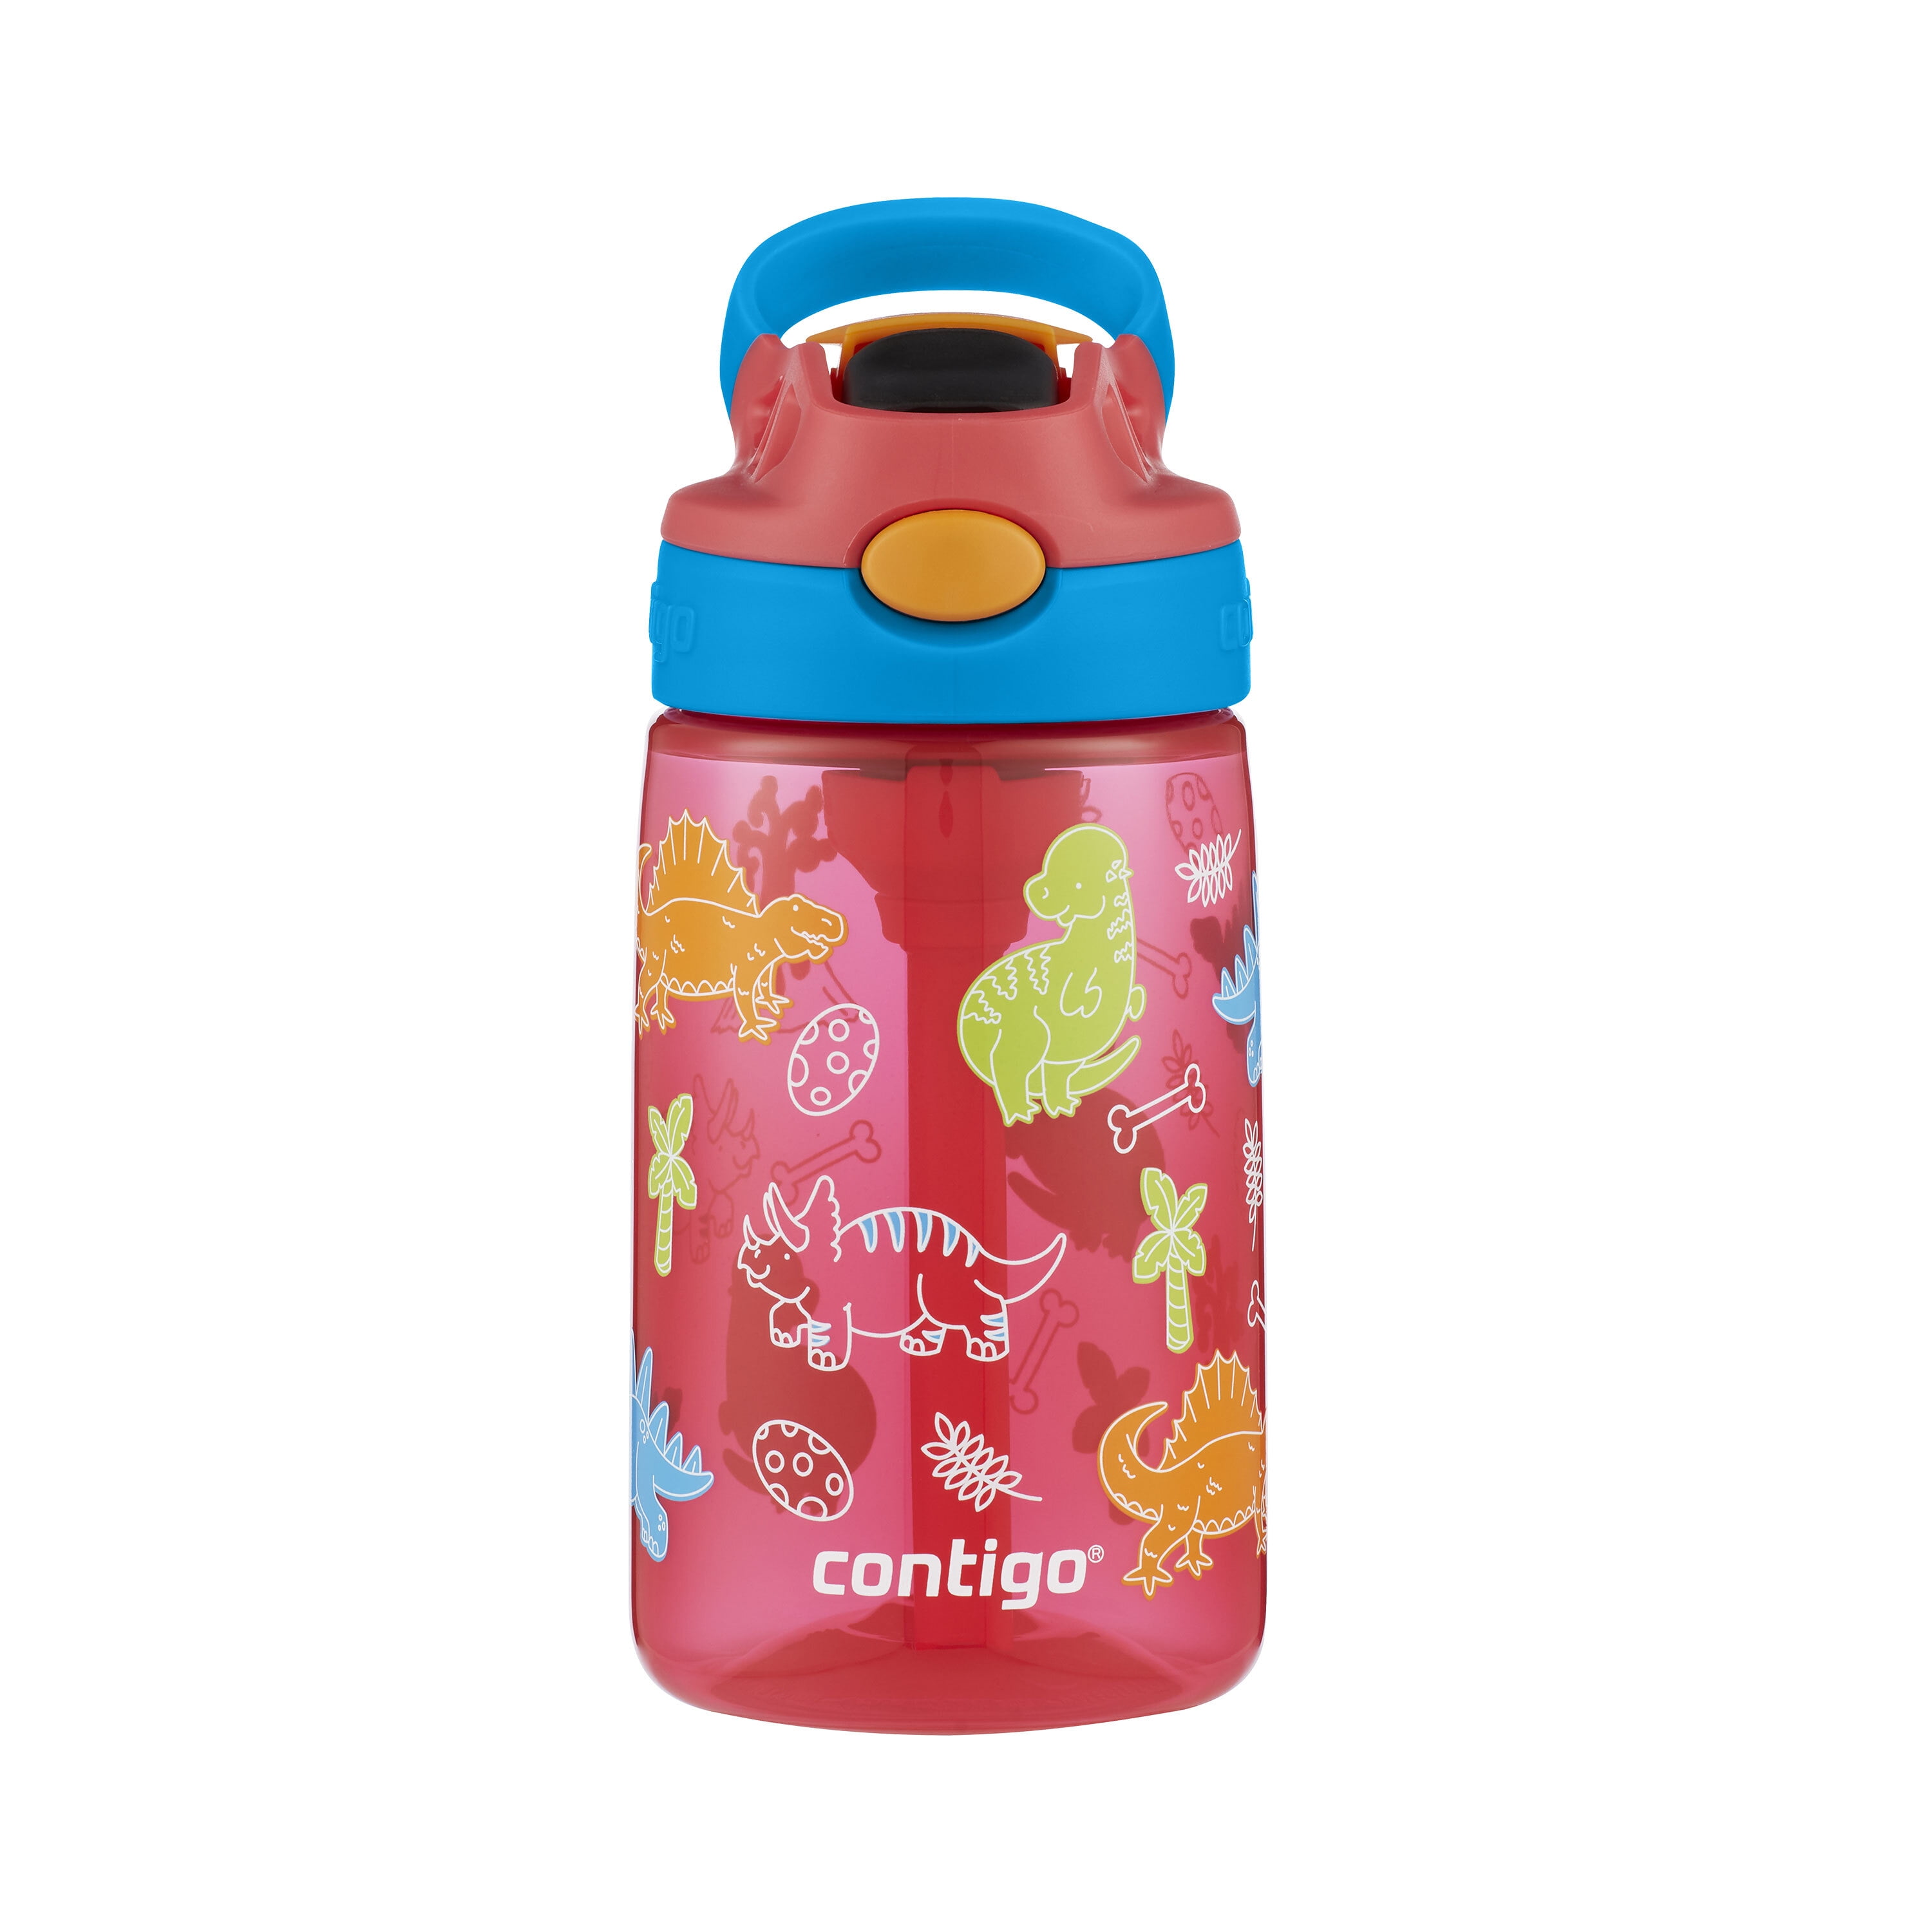 Contigo Kids Water Bottle with Redesigned AUTOSPOUT Straw, 14 oz.,  2-Pack, Blueberry and Blue Raspberry & Blueberry and Blue Raspberry with  Cosmos 21.99